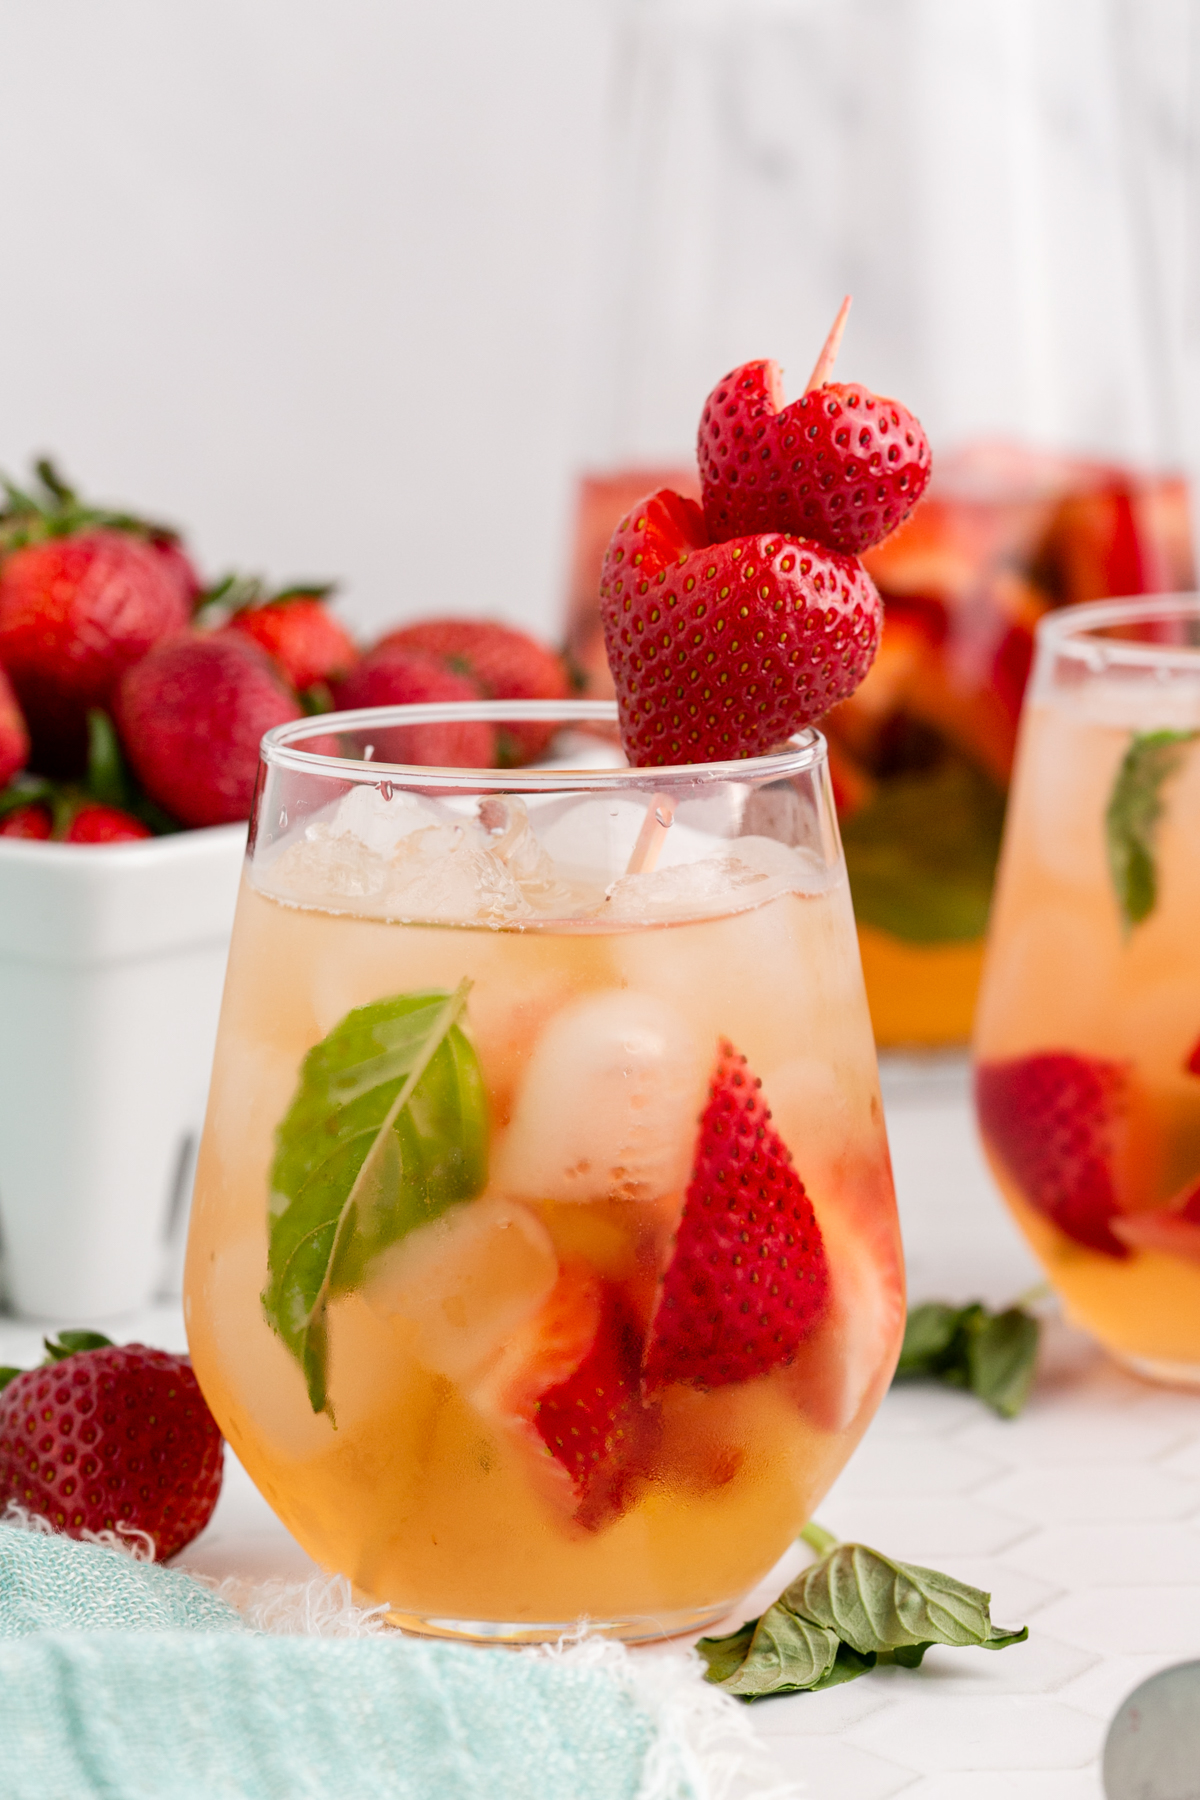 Make this colorful and fun refreshing Strawberry and Basil Sangria for your next summer party! Add in some white wine, and you have the perfect match It will be wonderful to serve at brunches and bridal parties, too. via @foodhussy